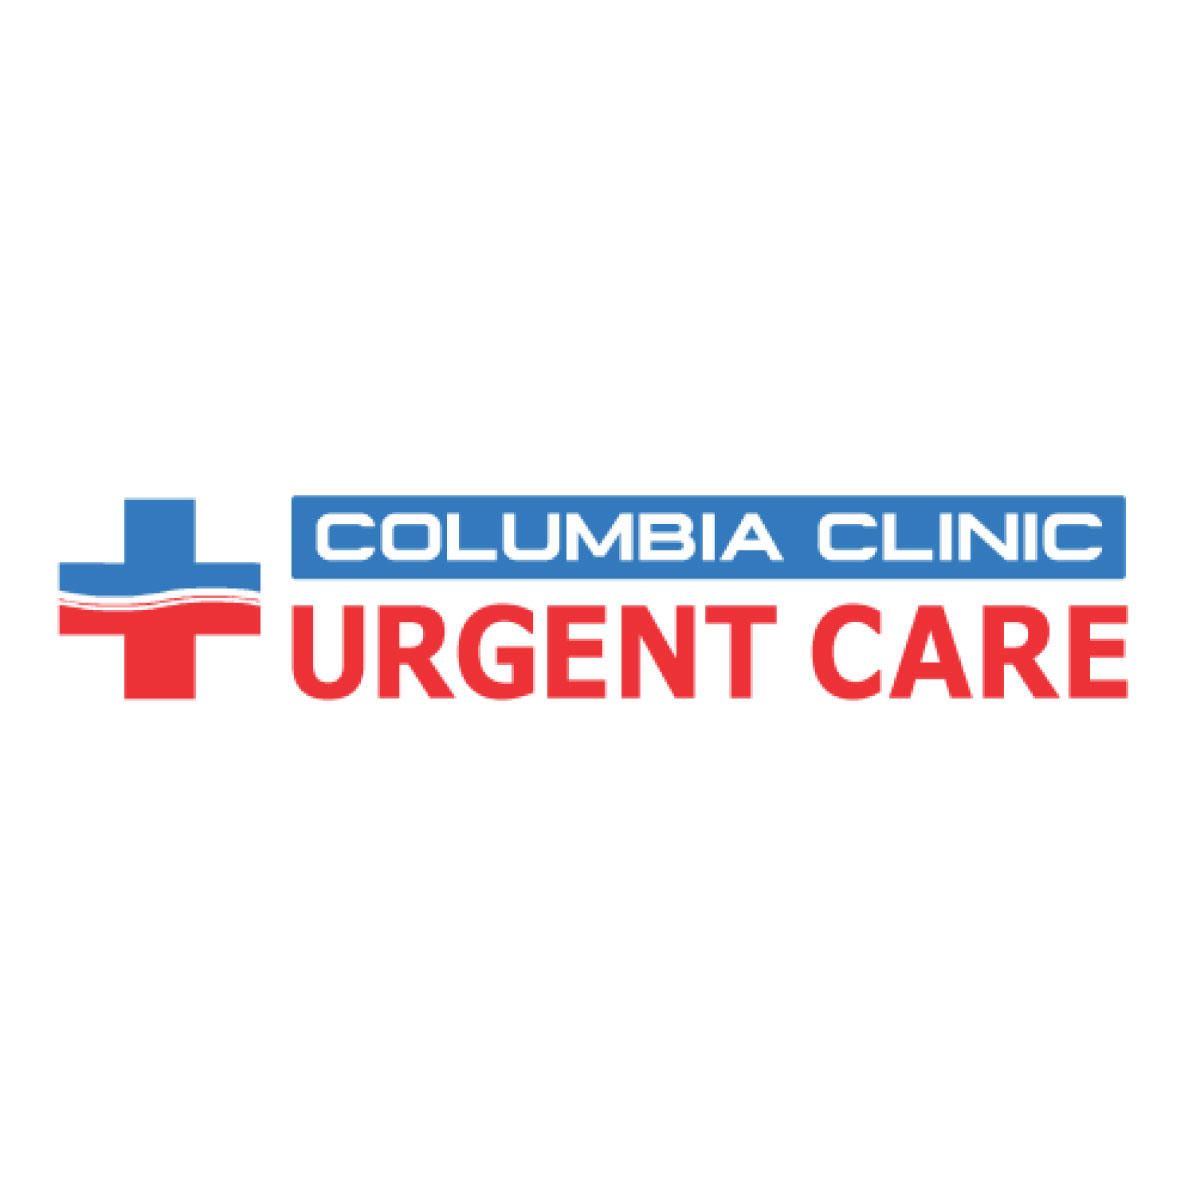 Columbia Clinic Urgent Care - Clackamas (Happy Valley), OR | 9995 SE 82nd Ave, Happy Valley, OR, 97086 | +1 (503) 966-5676